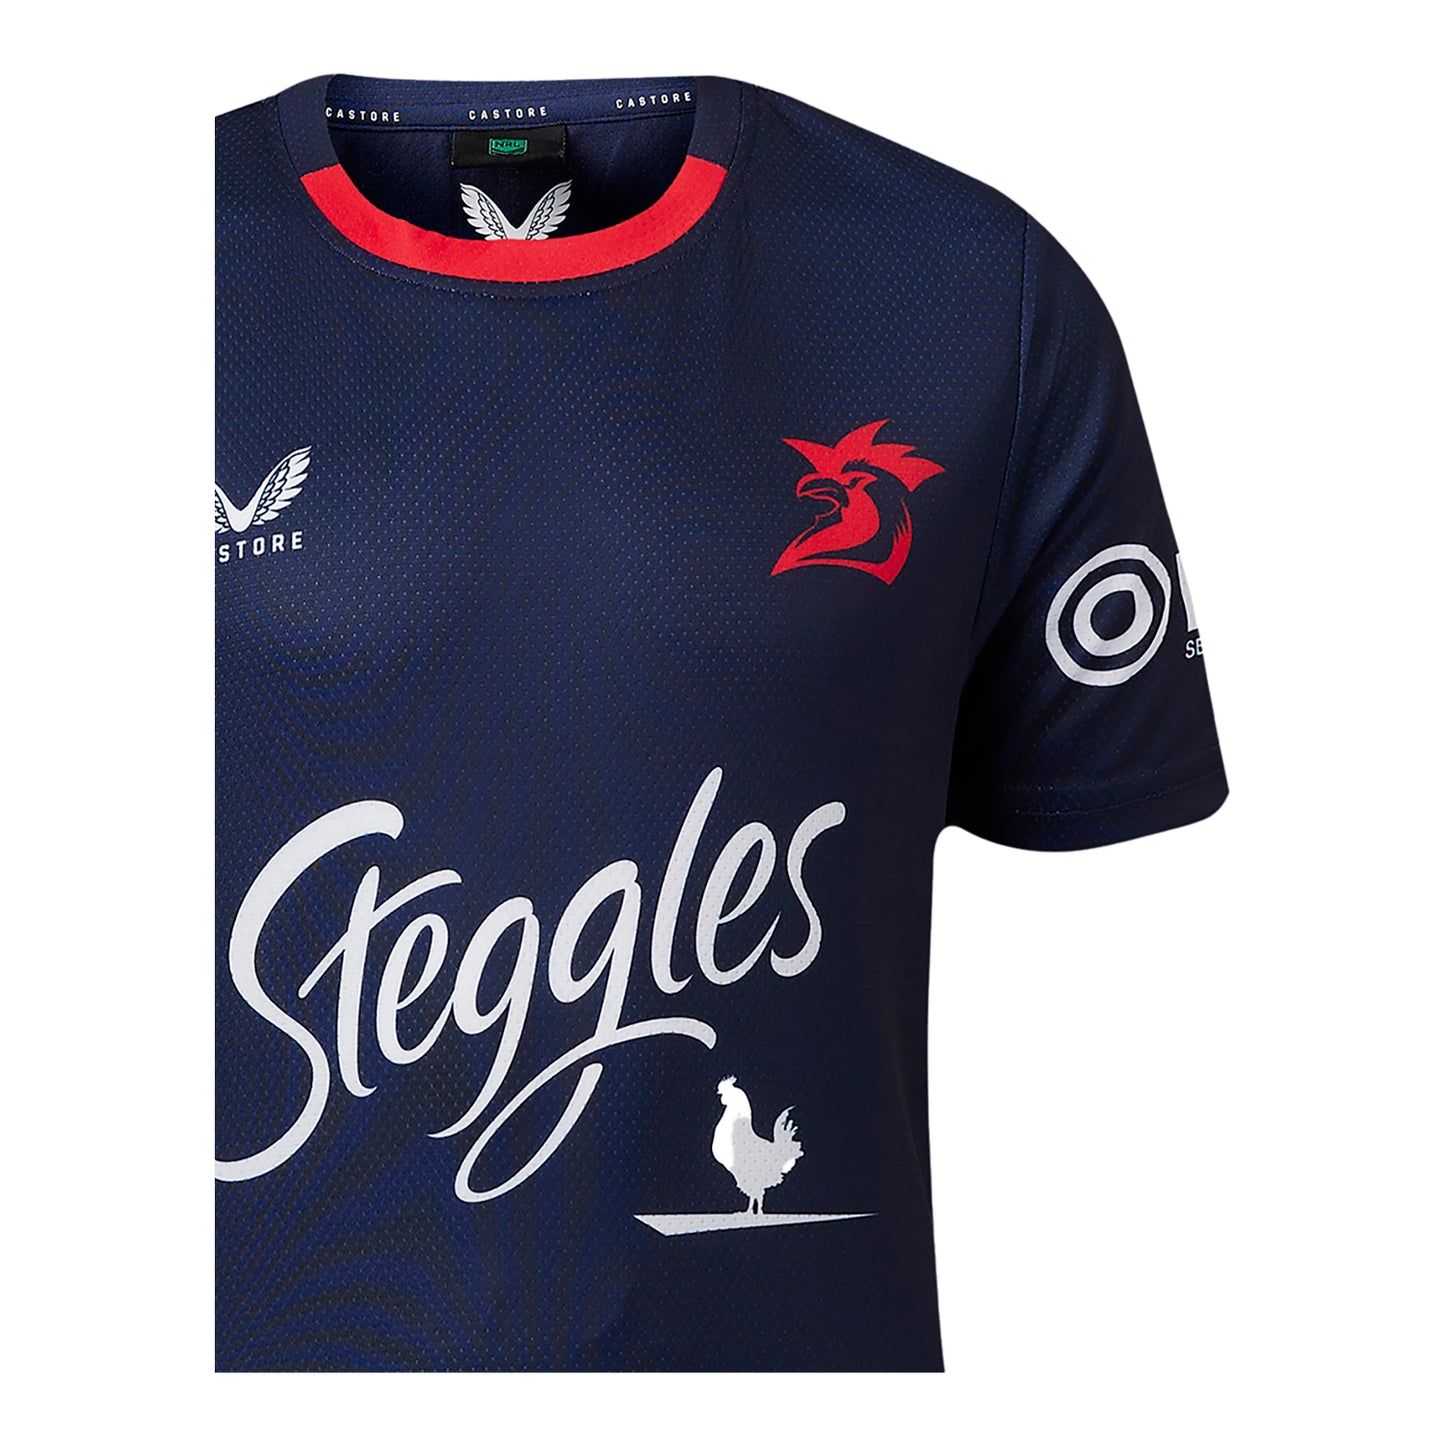 Sydney Roosters 2024 Youth Training Tee